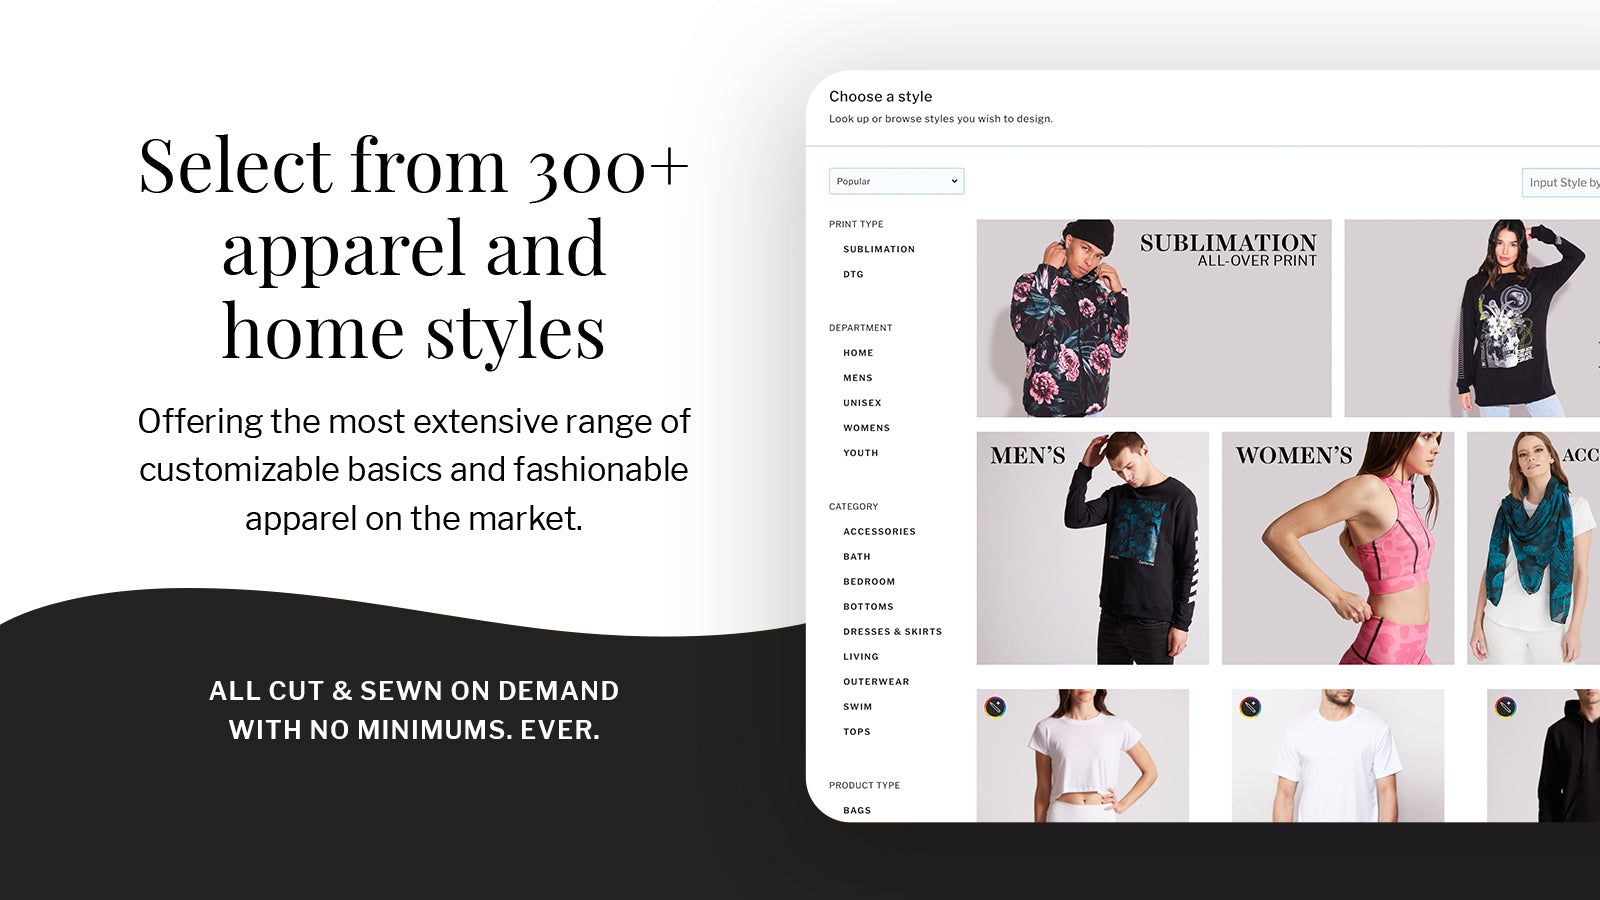 Select from over 300 apparel and home print on demand styles.